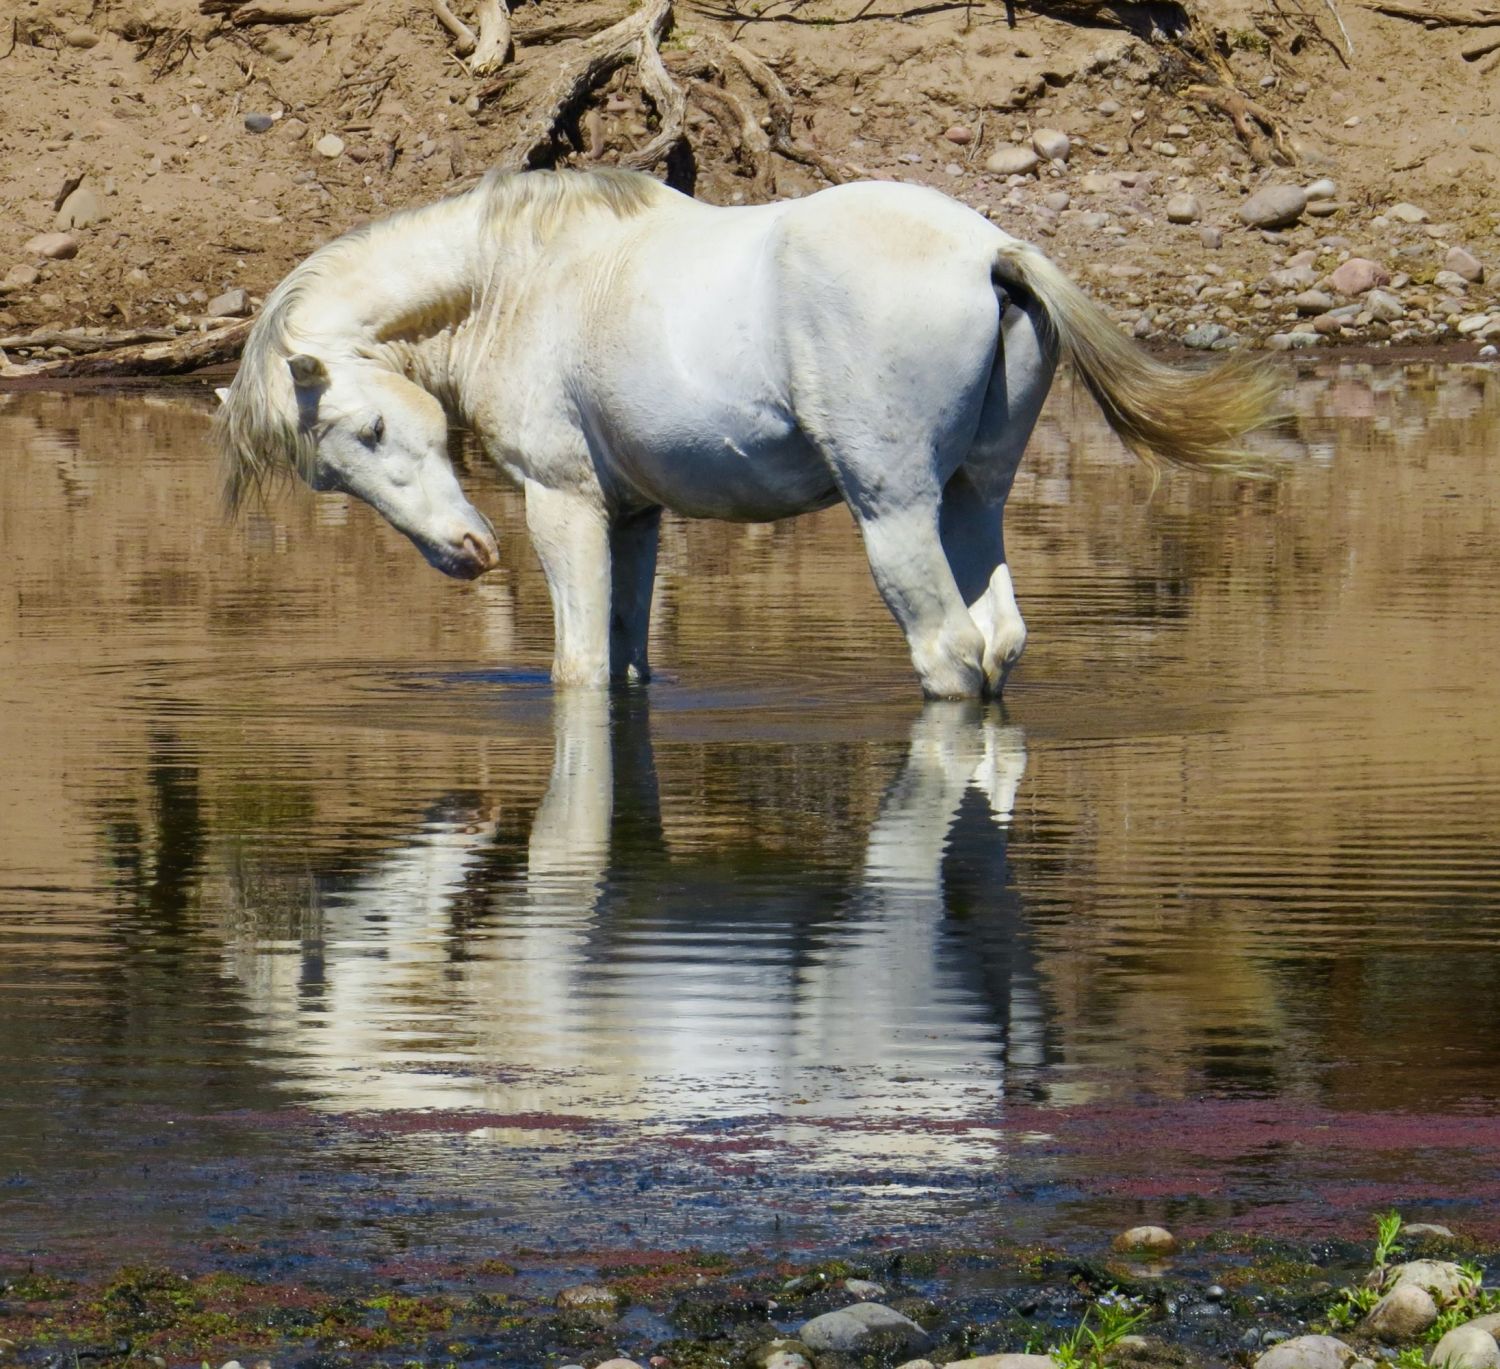  This beautiful white stallion may give you a clue to this adventure!